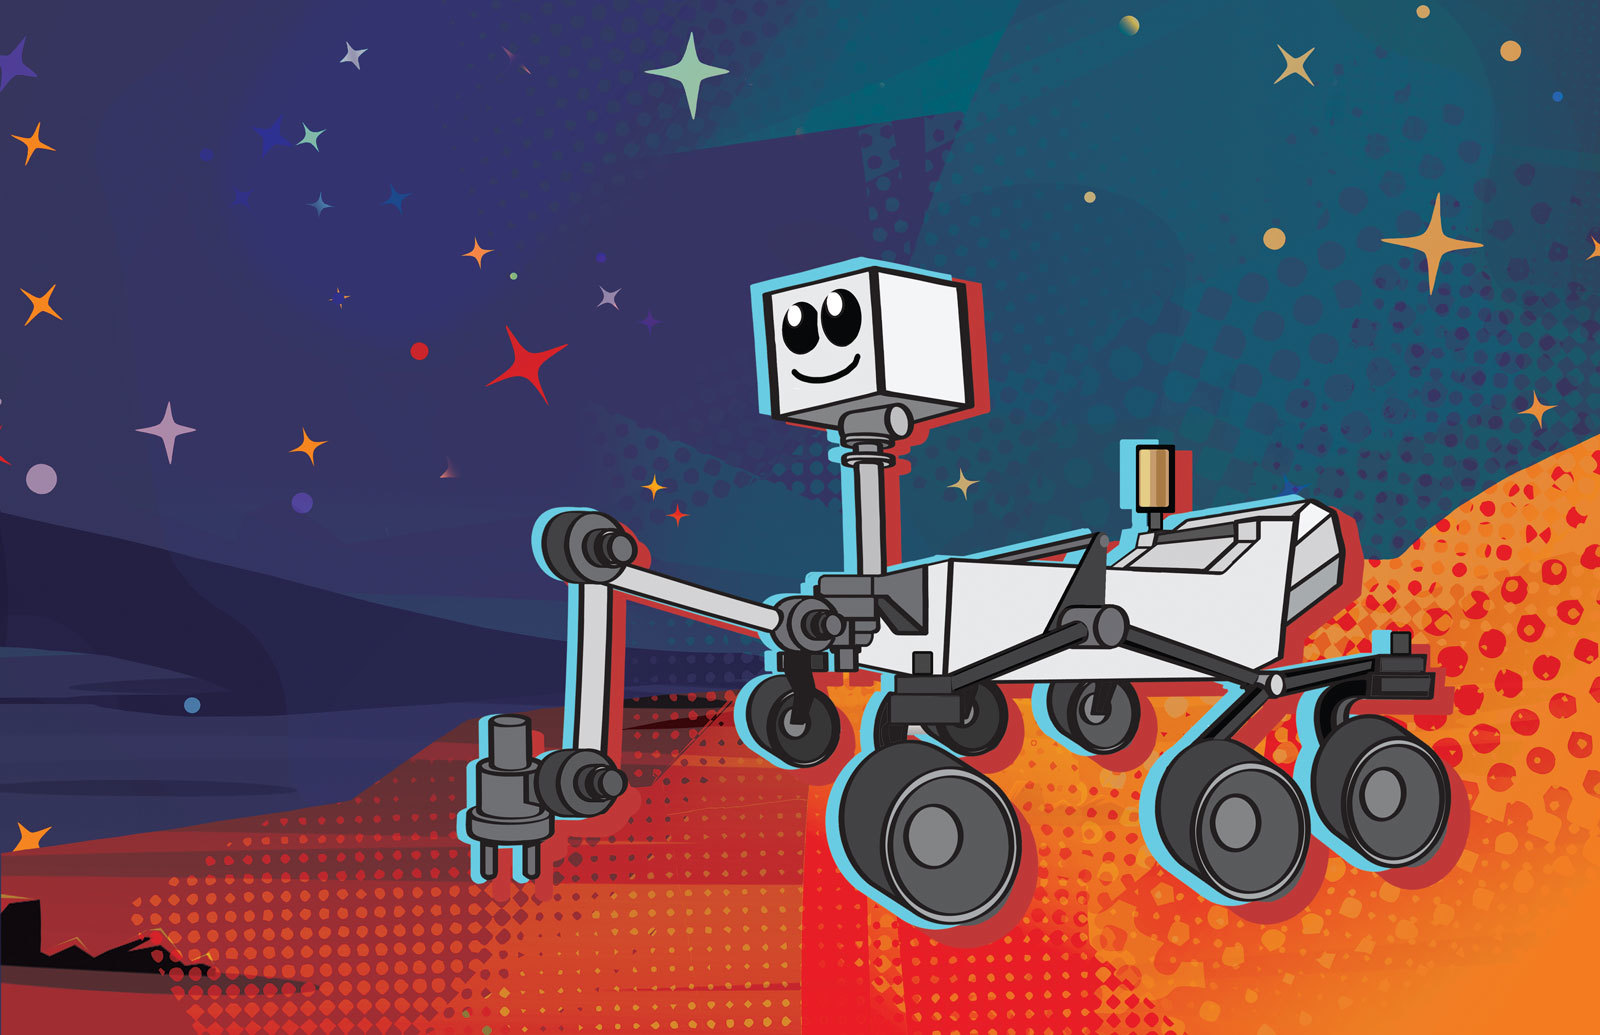 This cartoon depicts NASA's next Mars rover, which launches in 2020.